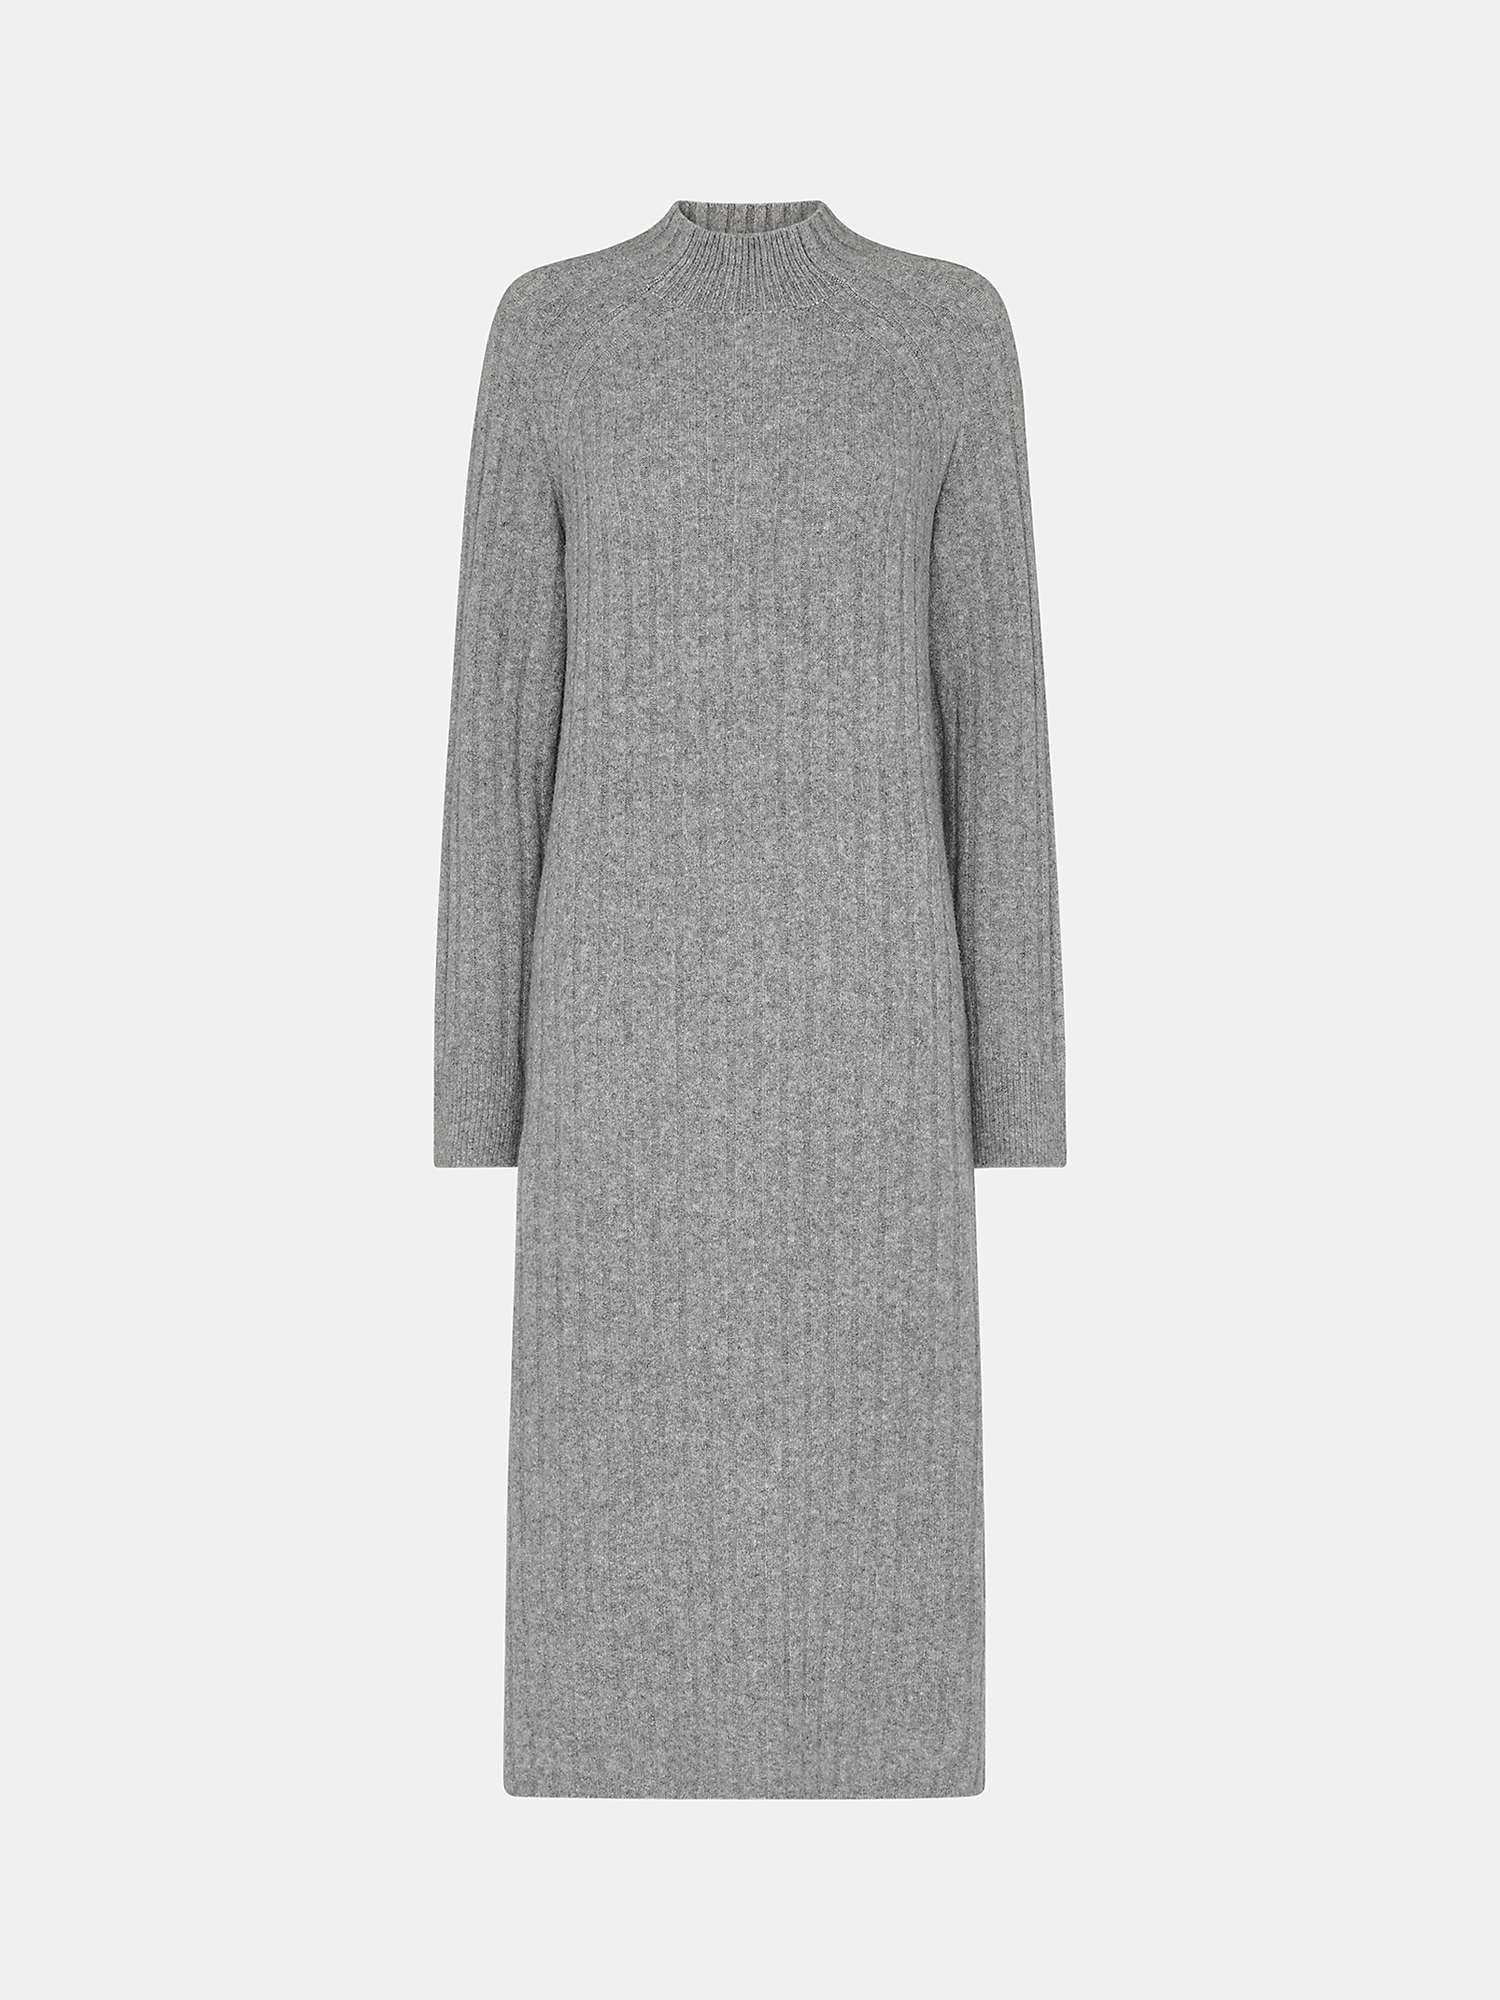 Buy Whistles Ribbed Knitted Midi Dress Online at johnlewis.com